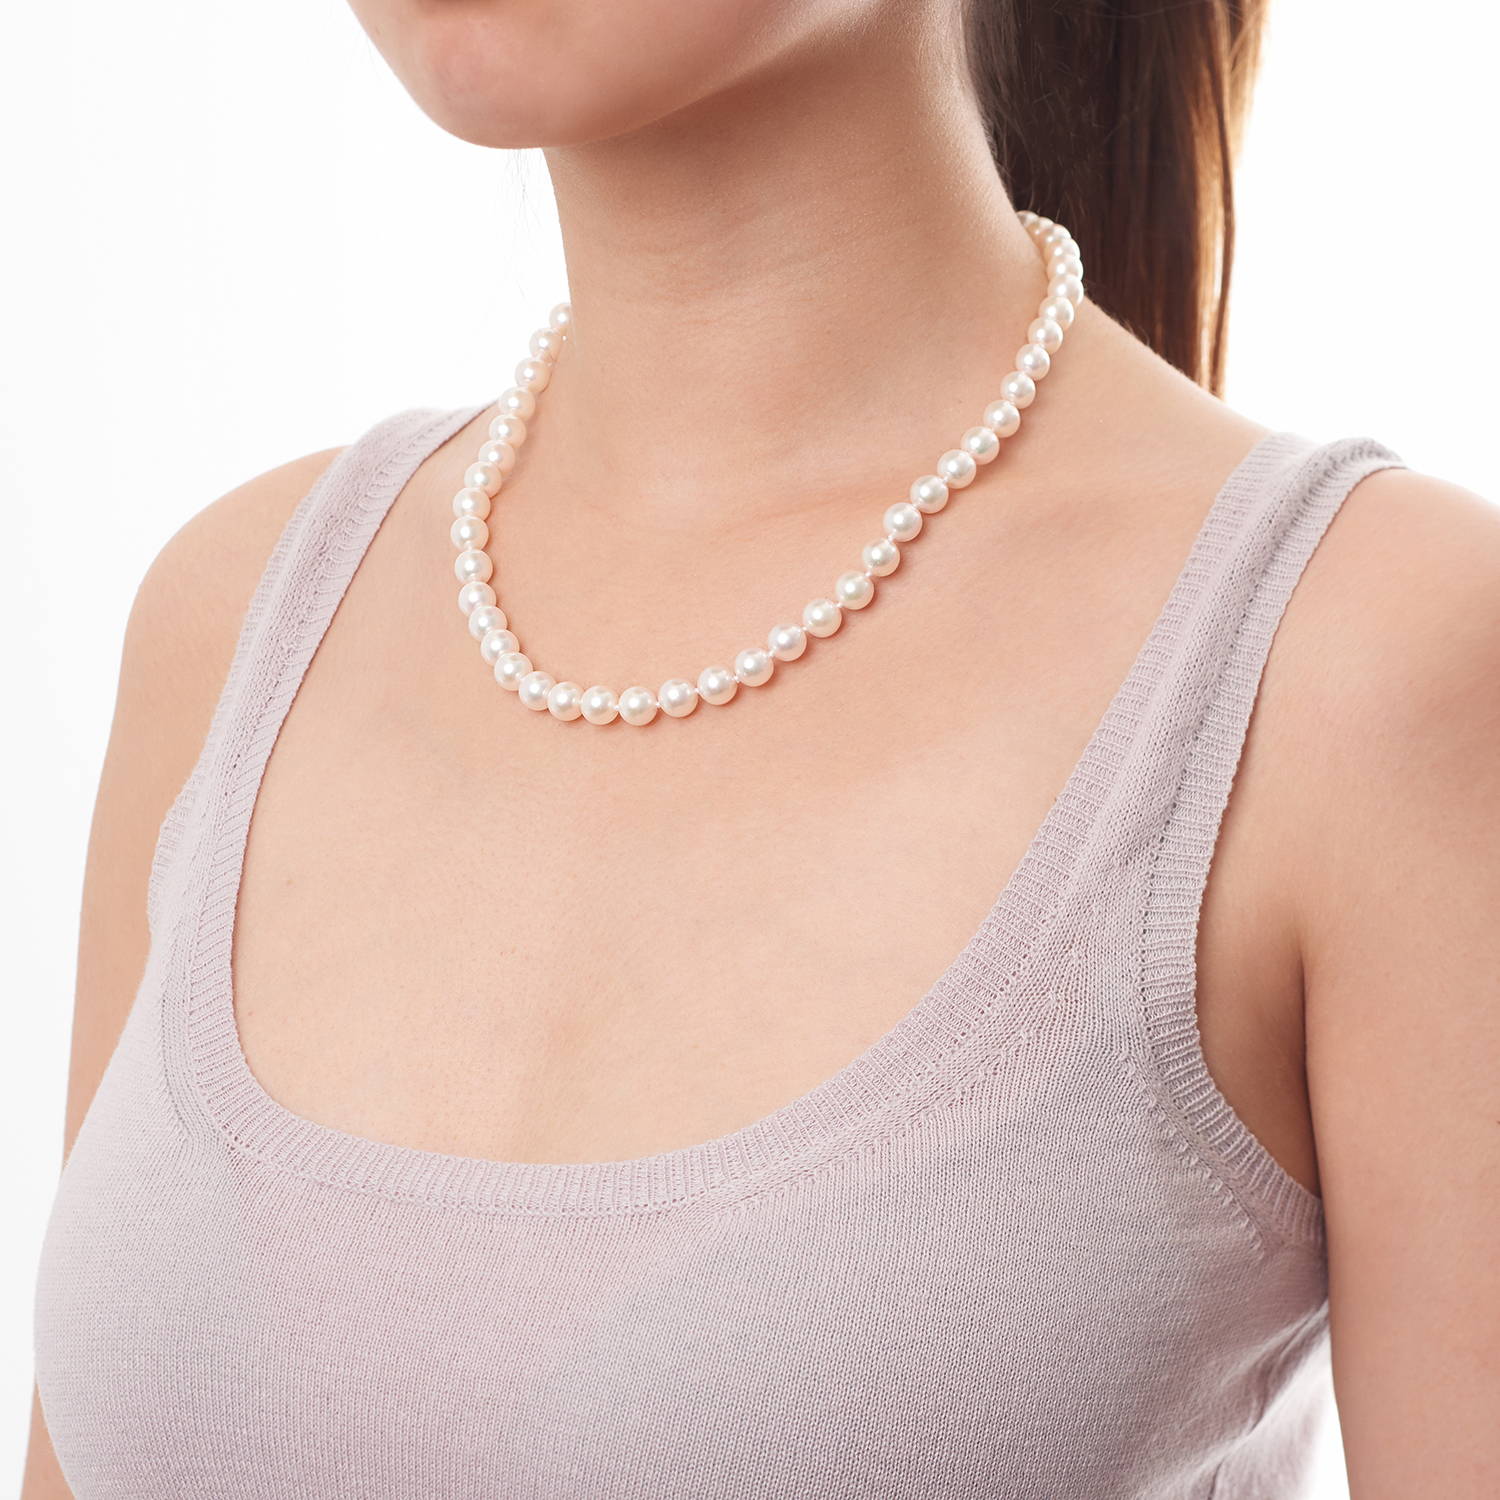 Pearl Necklace Sizes: 7.5-8.0mm